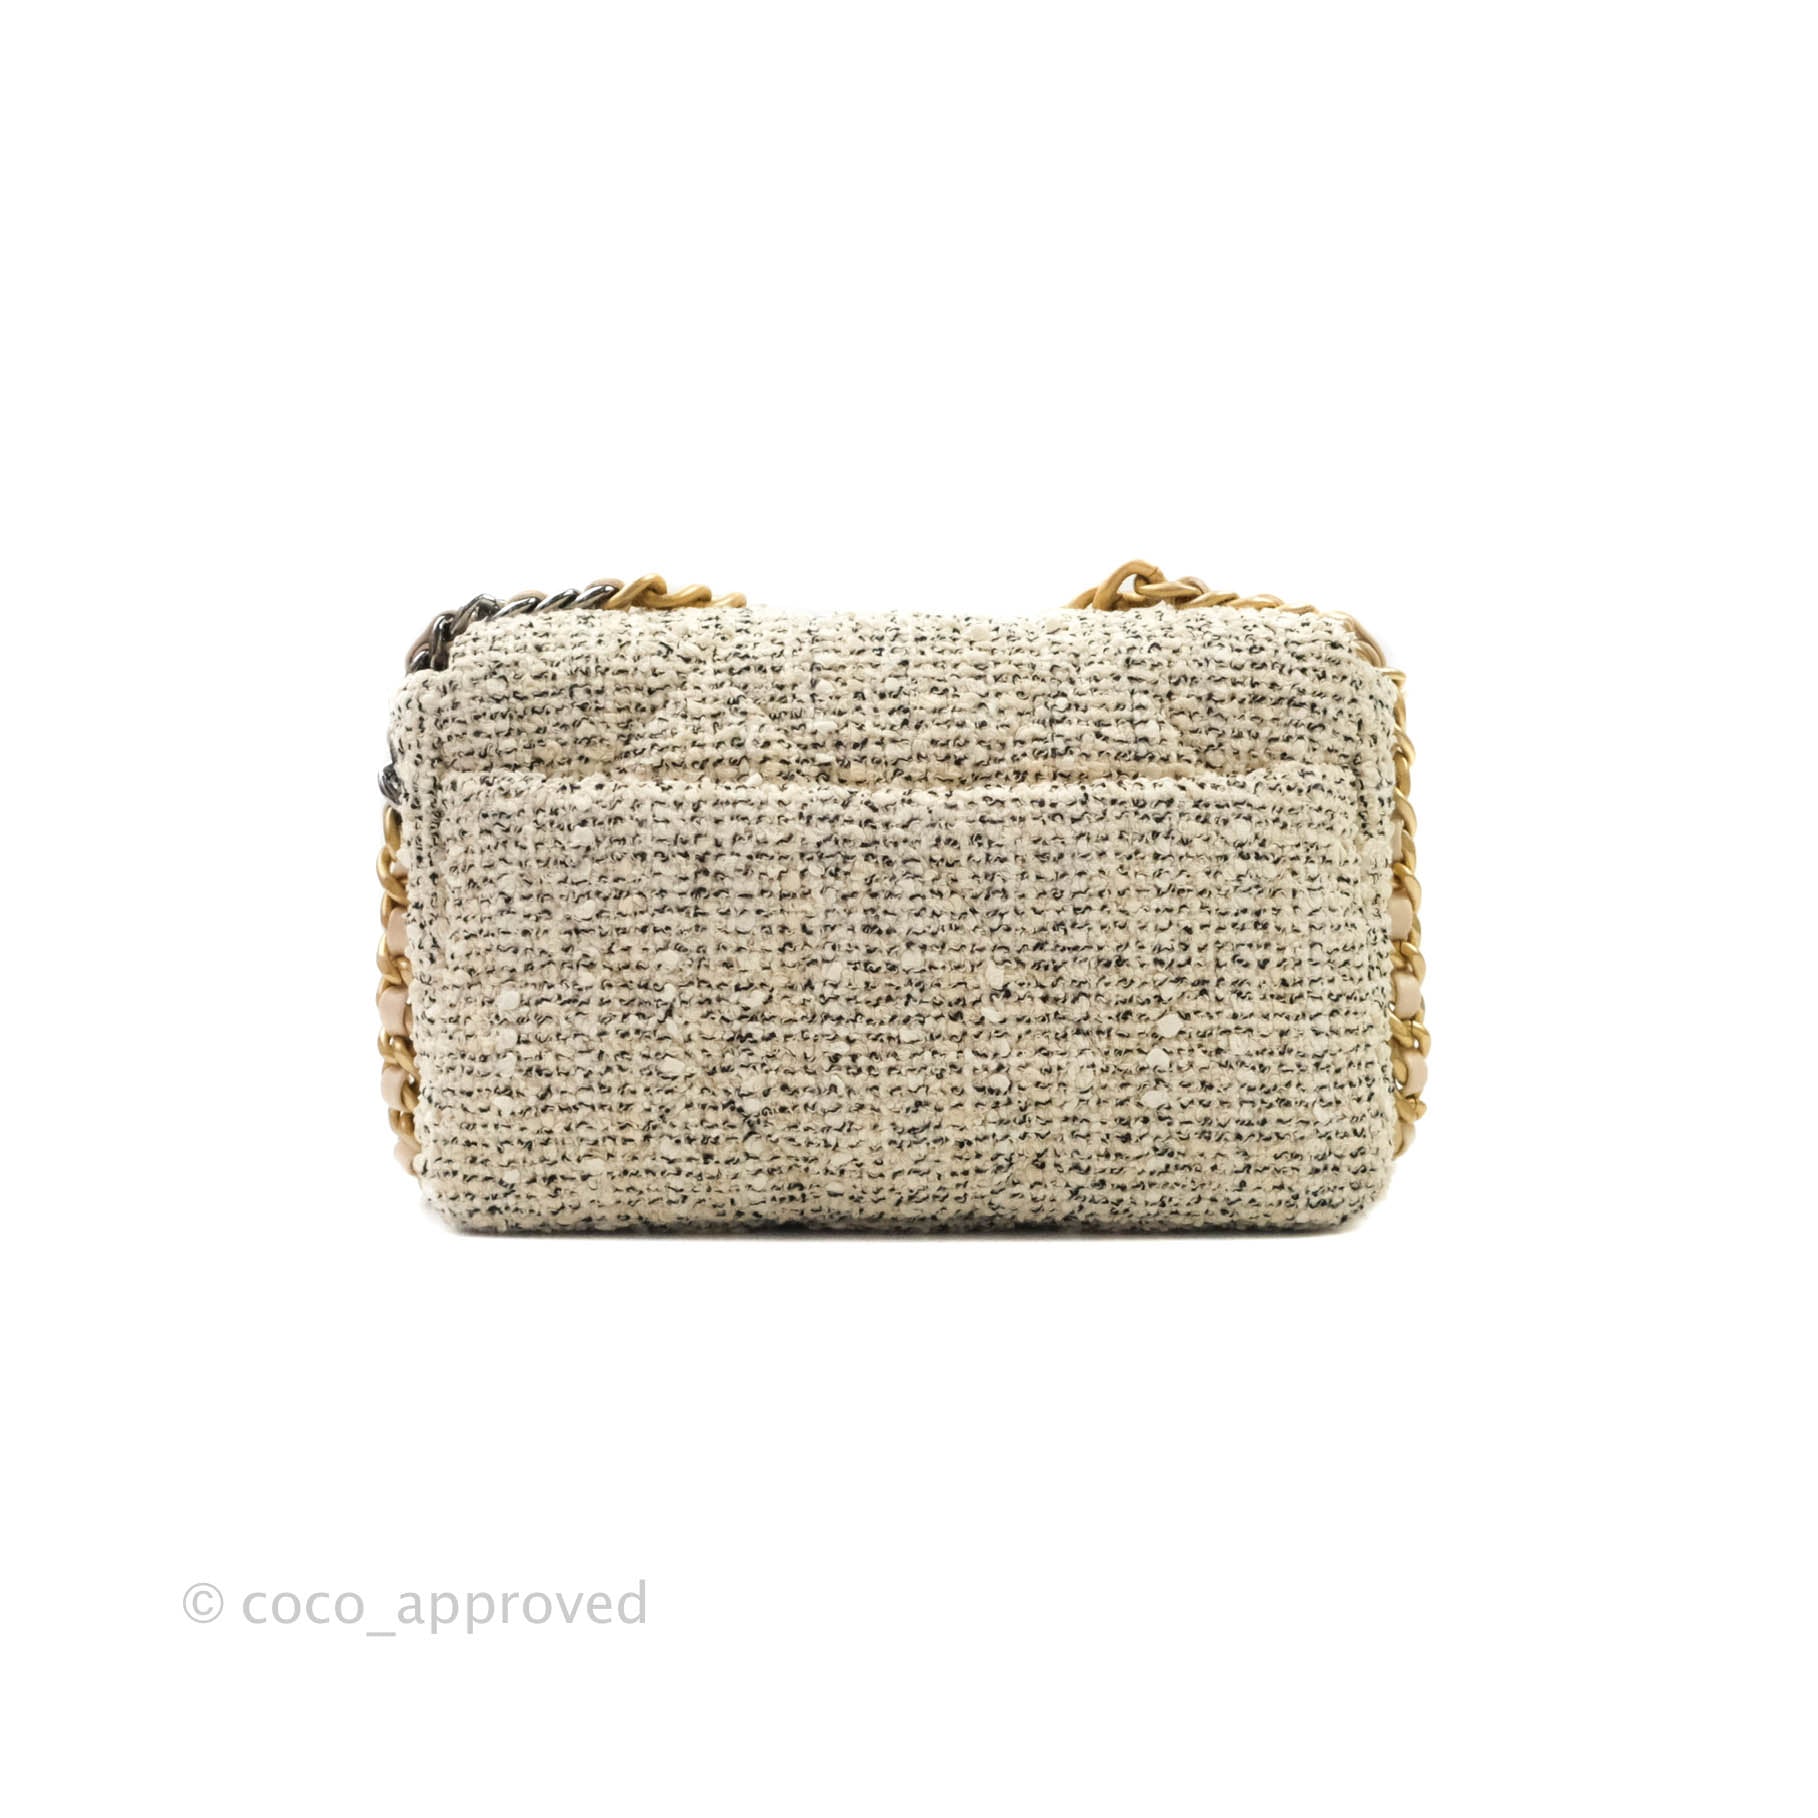 Chanel 19 Oreo Beige Tweed size Small Flap Bag from 21S Collection –  Globalluxcloset